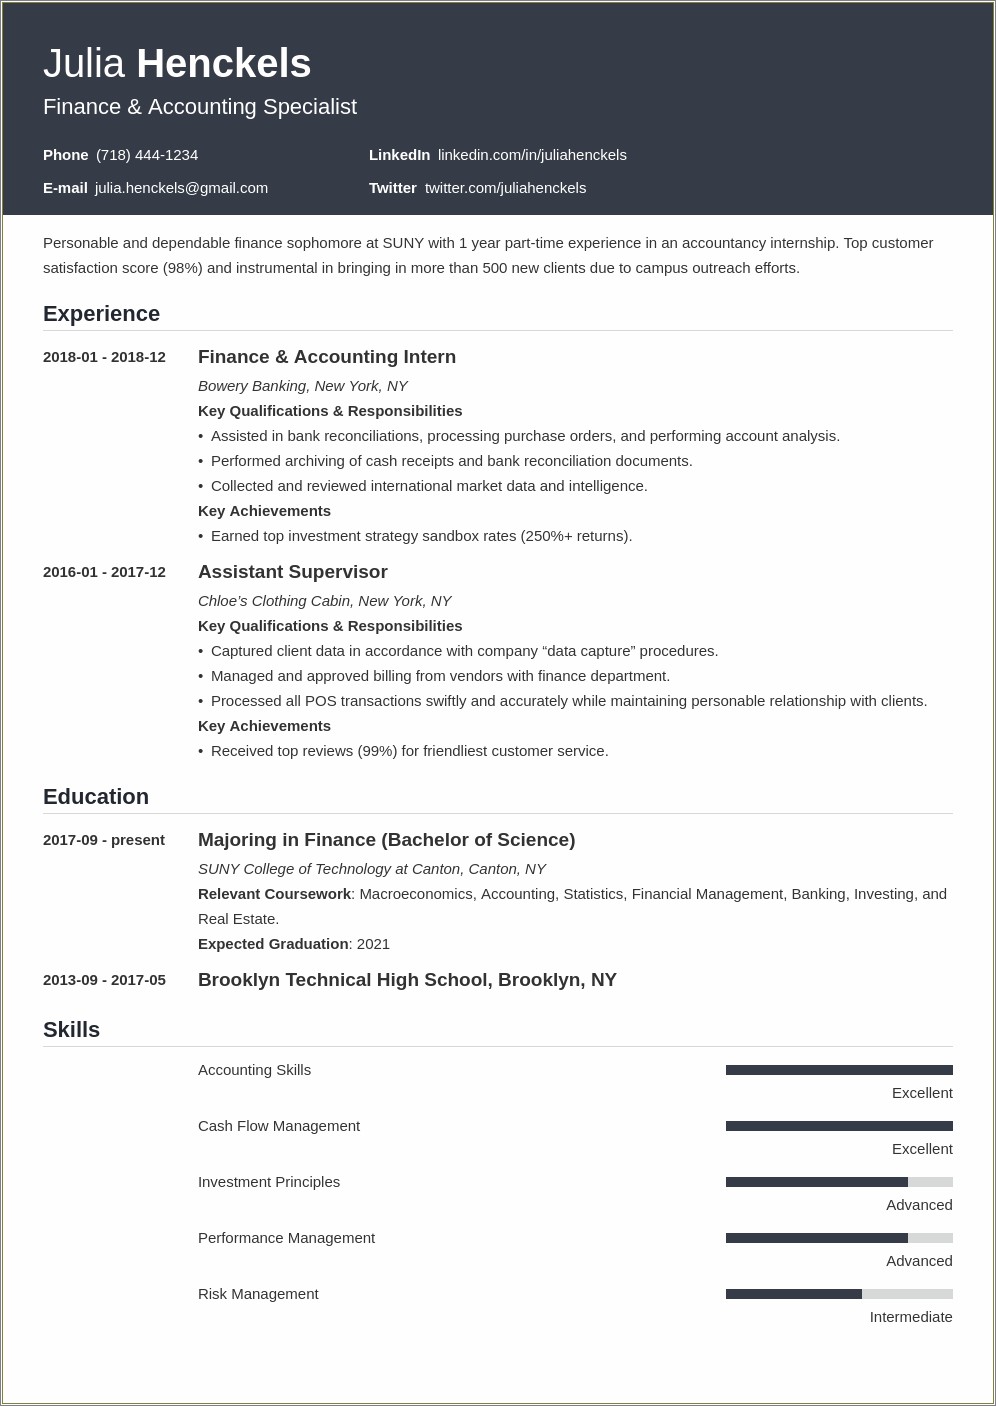 Sample Resume Templates For College Students